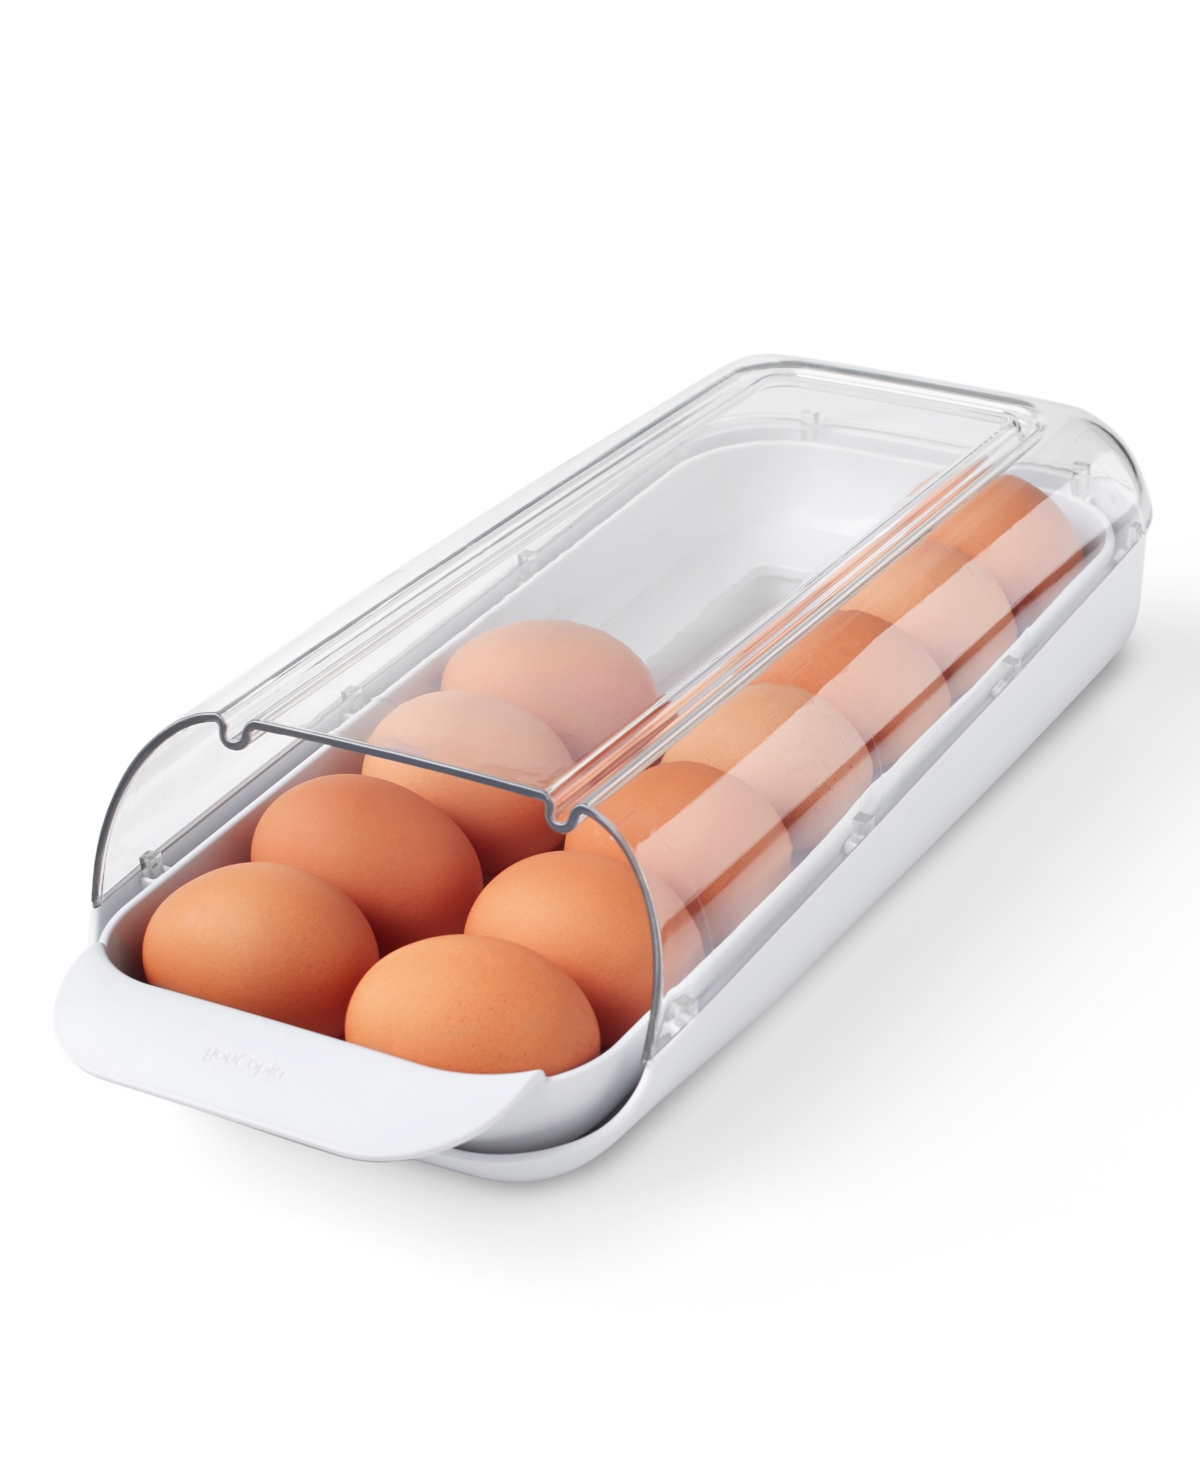 Youcopia 3.30" Fridgeview Rolling Egg Holder In White